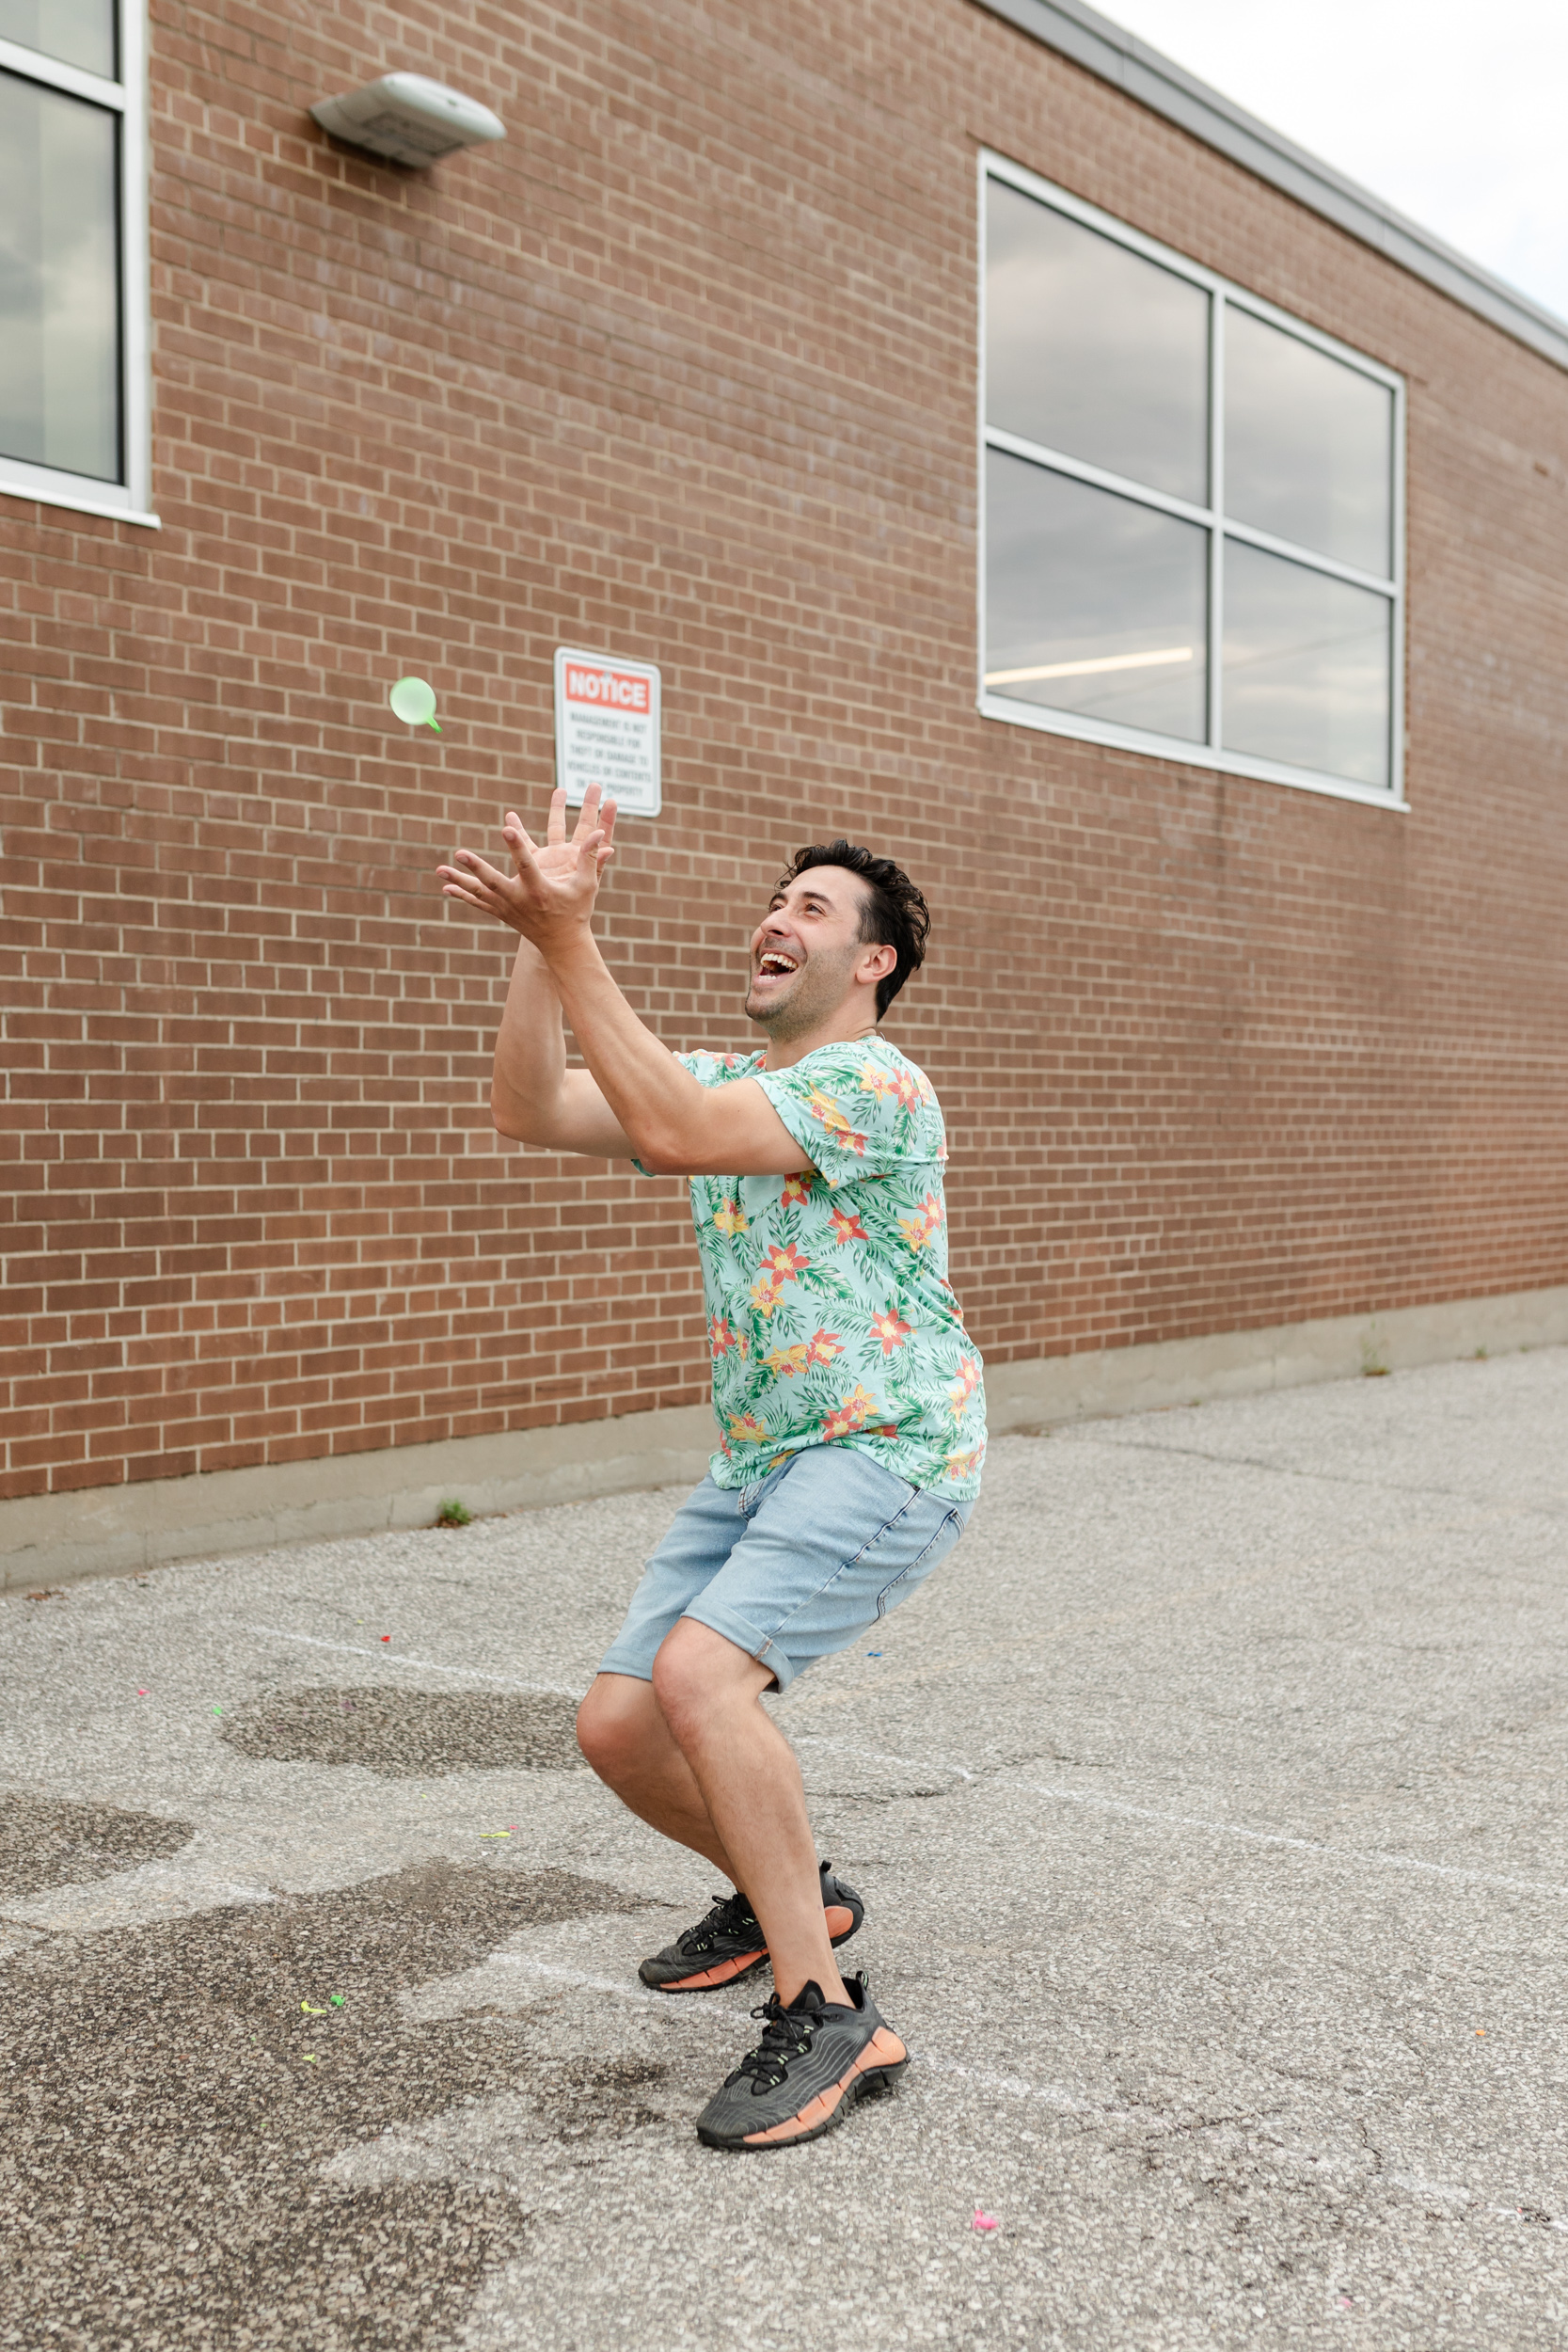 Social event: A man catching a frisbee during social gathering.